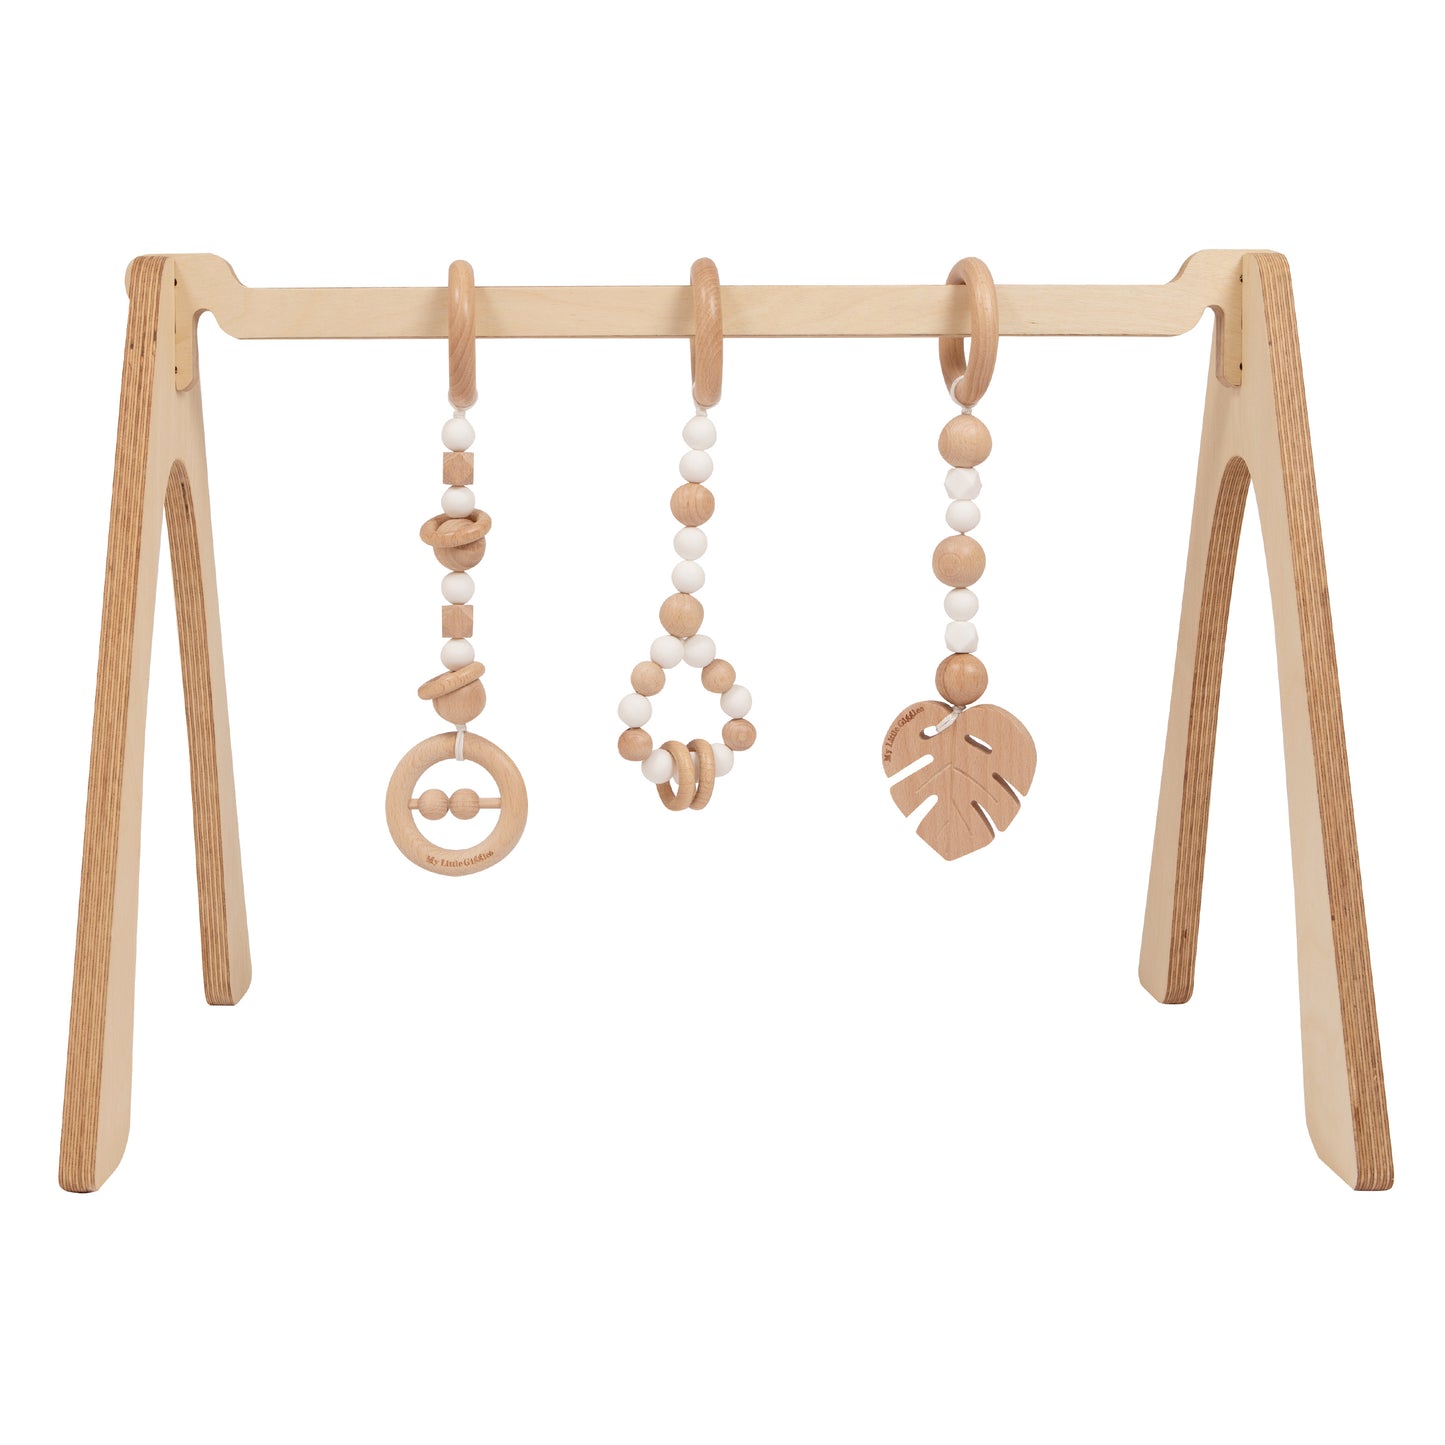 My Little Play Bar x3 Toys and Lambskin Rug - PACKAGE